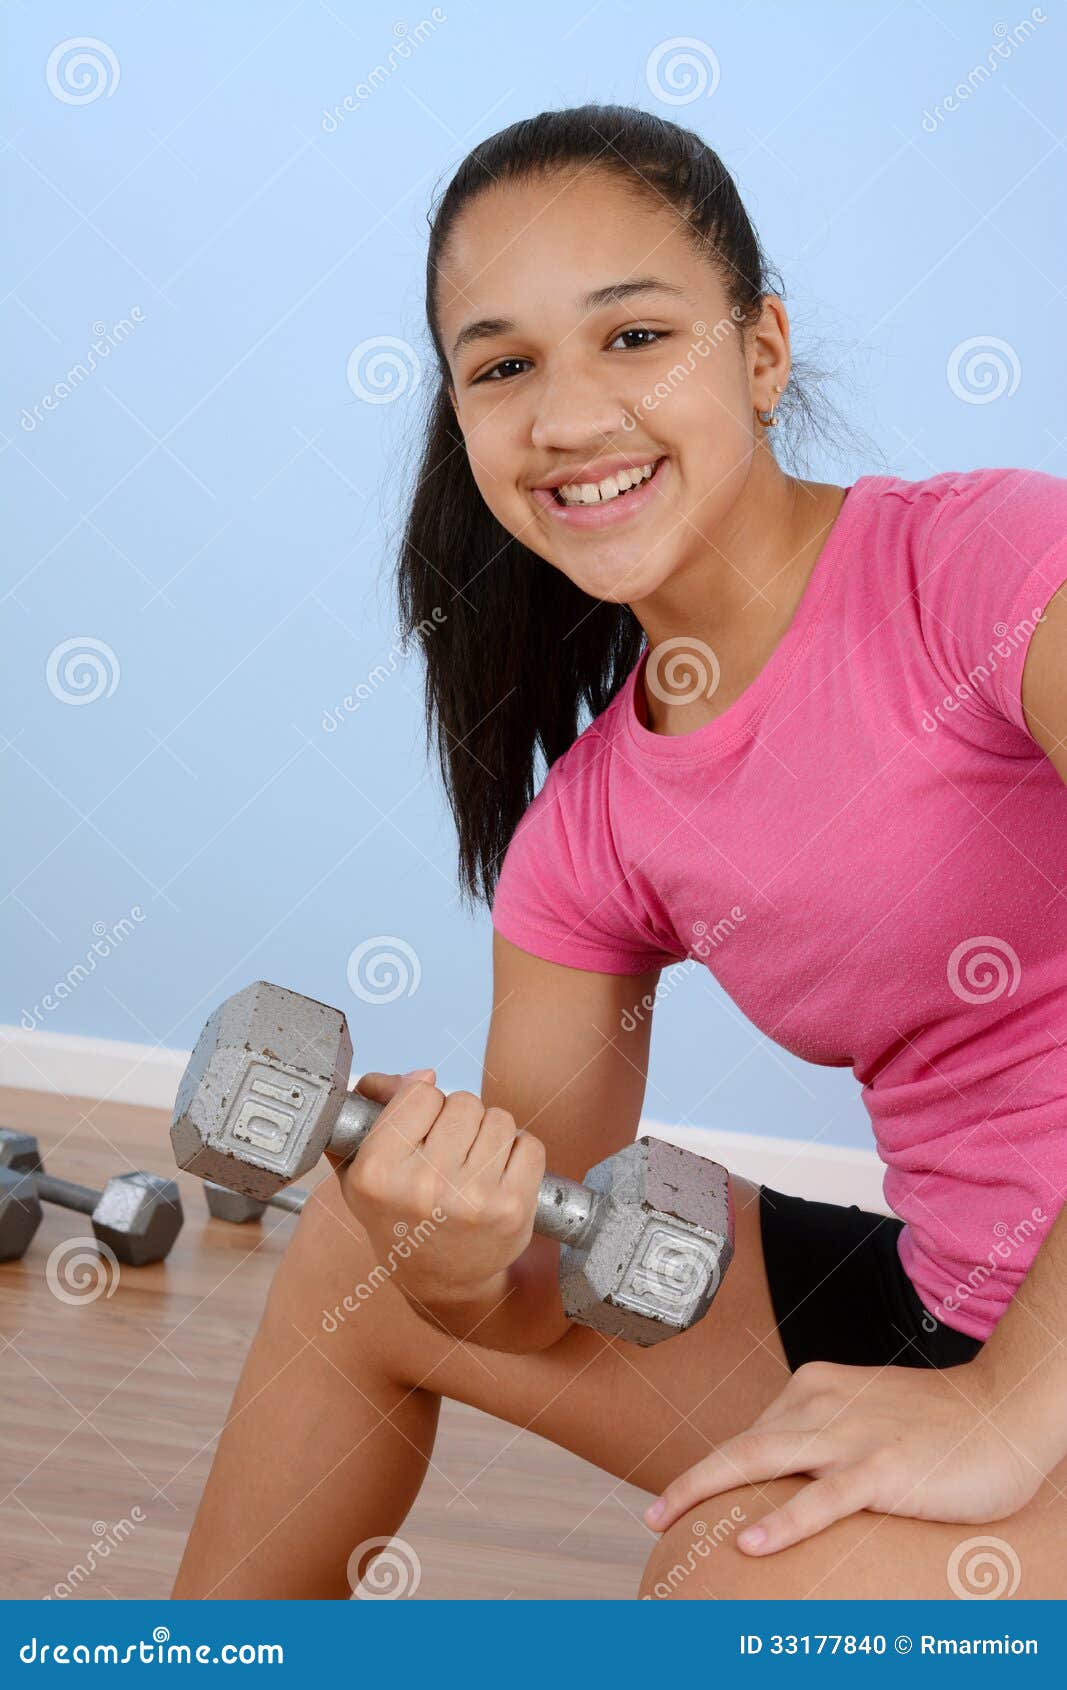 Working Out Teen 6